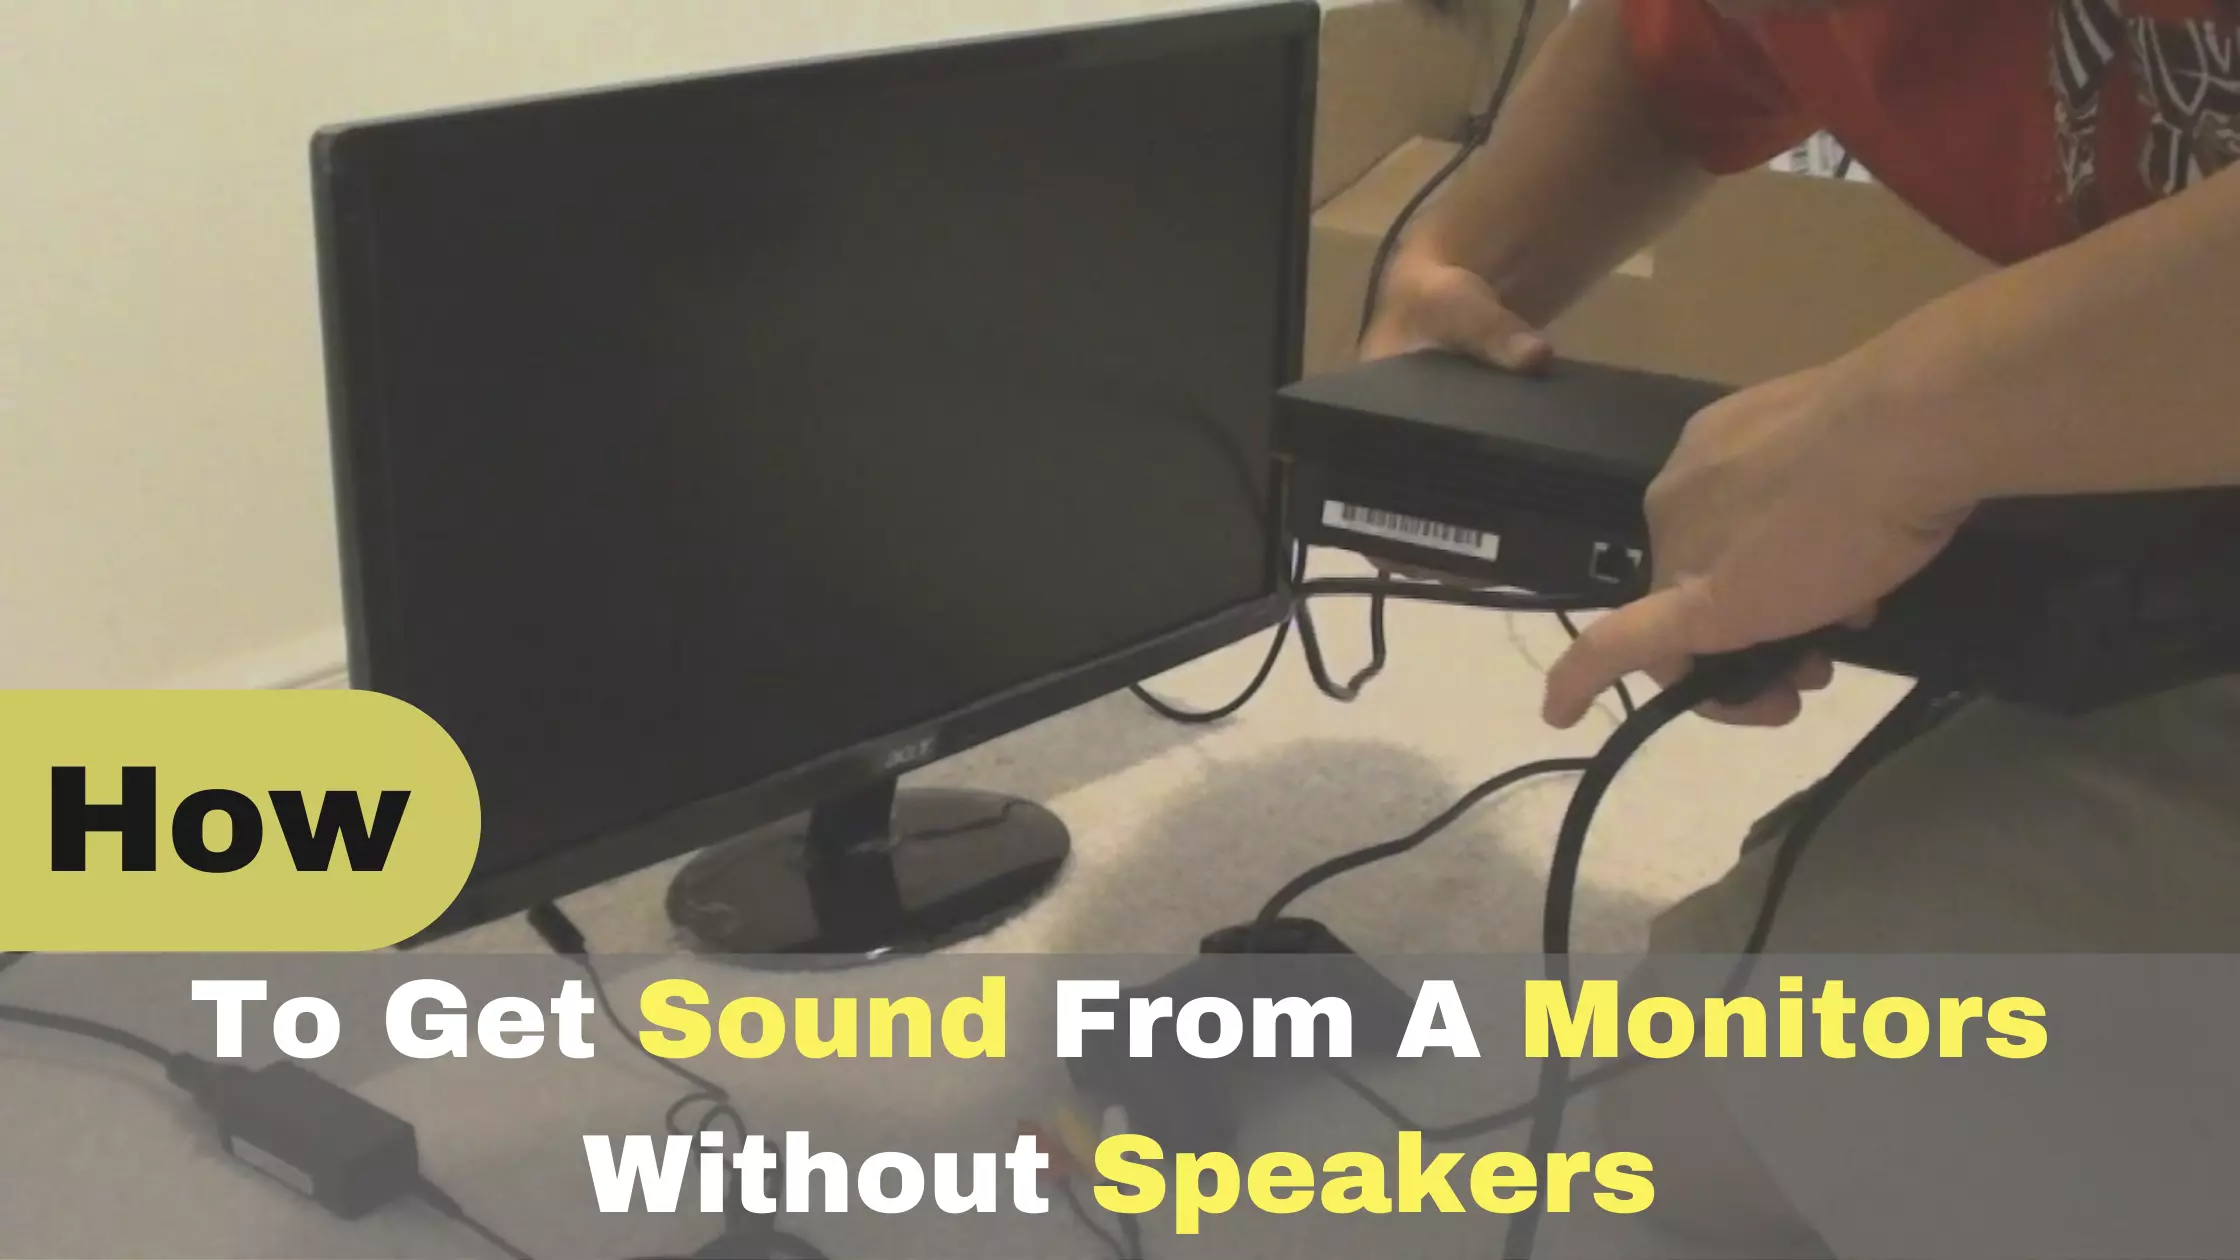 How to Get Sound from a Monitor Without Speakers? Detailed Guide